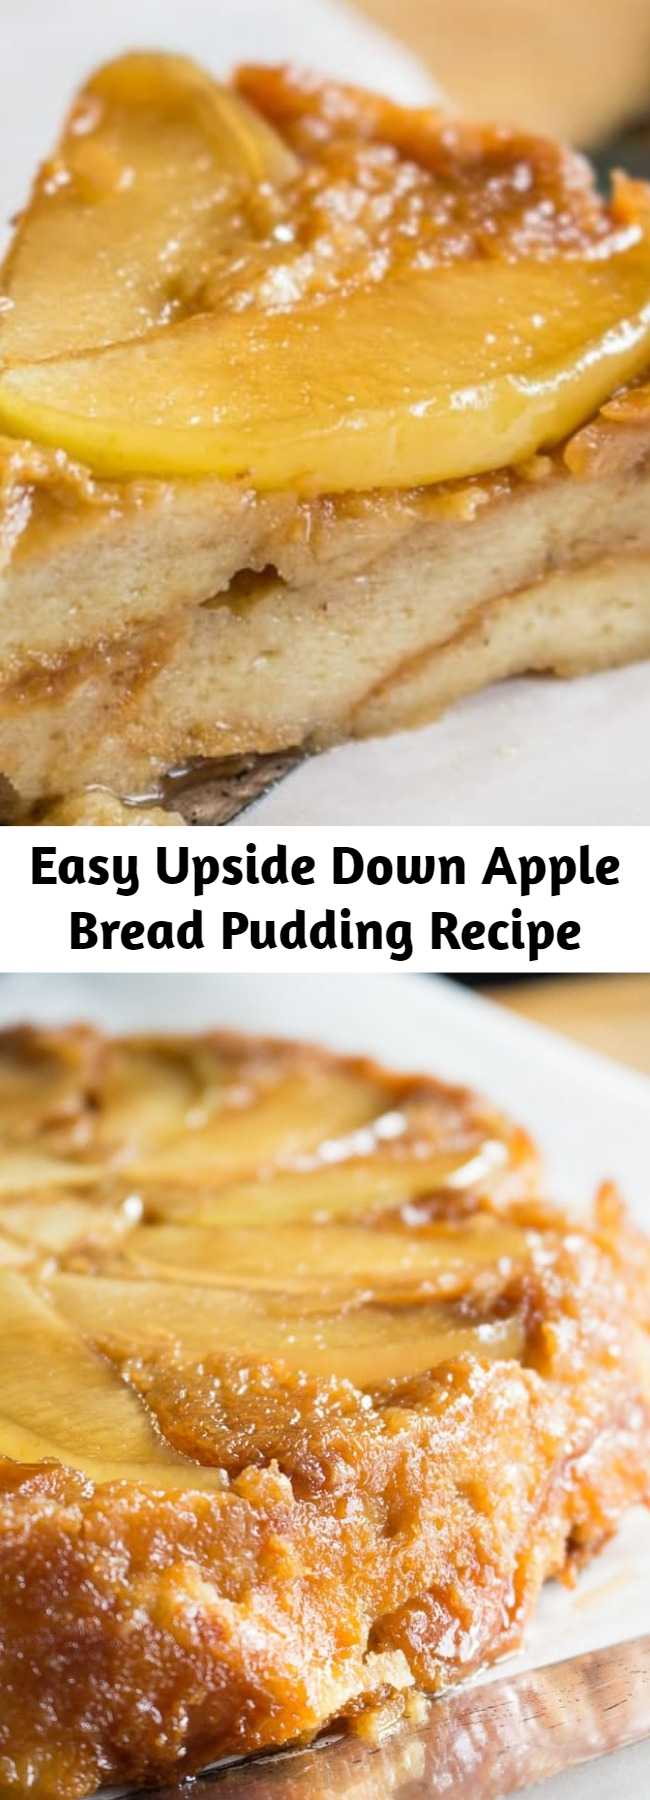 Easy Upside Down Apple Bread Pudding Recipe - Apple bread pudding has gone upside down!  You'll love this awesome and easy bread pudding recipe.  Try not to eat it all at one sitting. #apple #applepie #thanksgiving #breadpudding #dessert